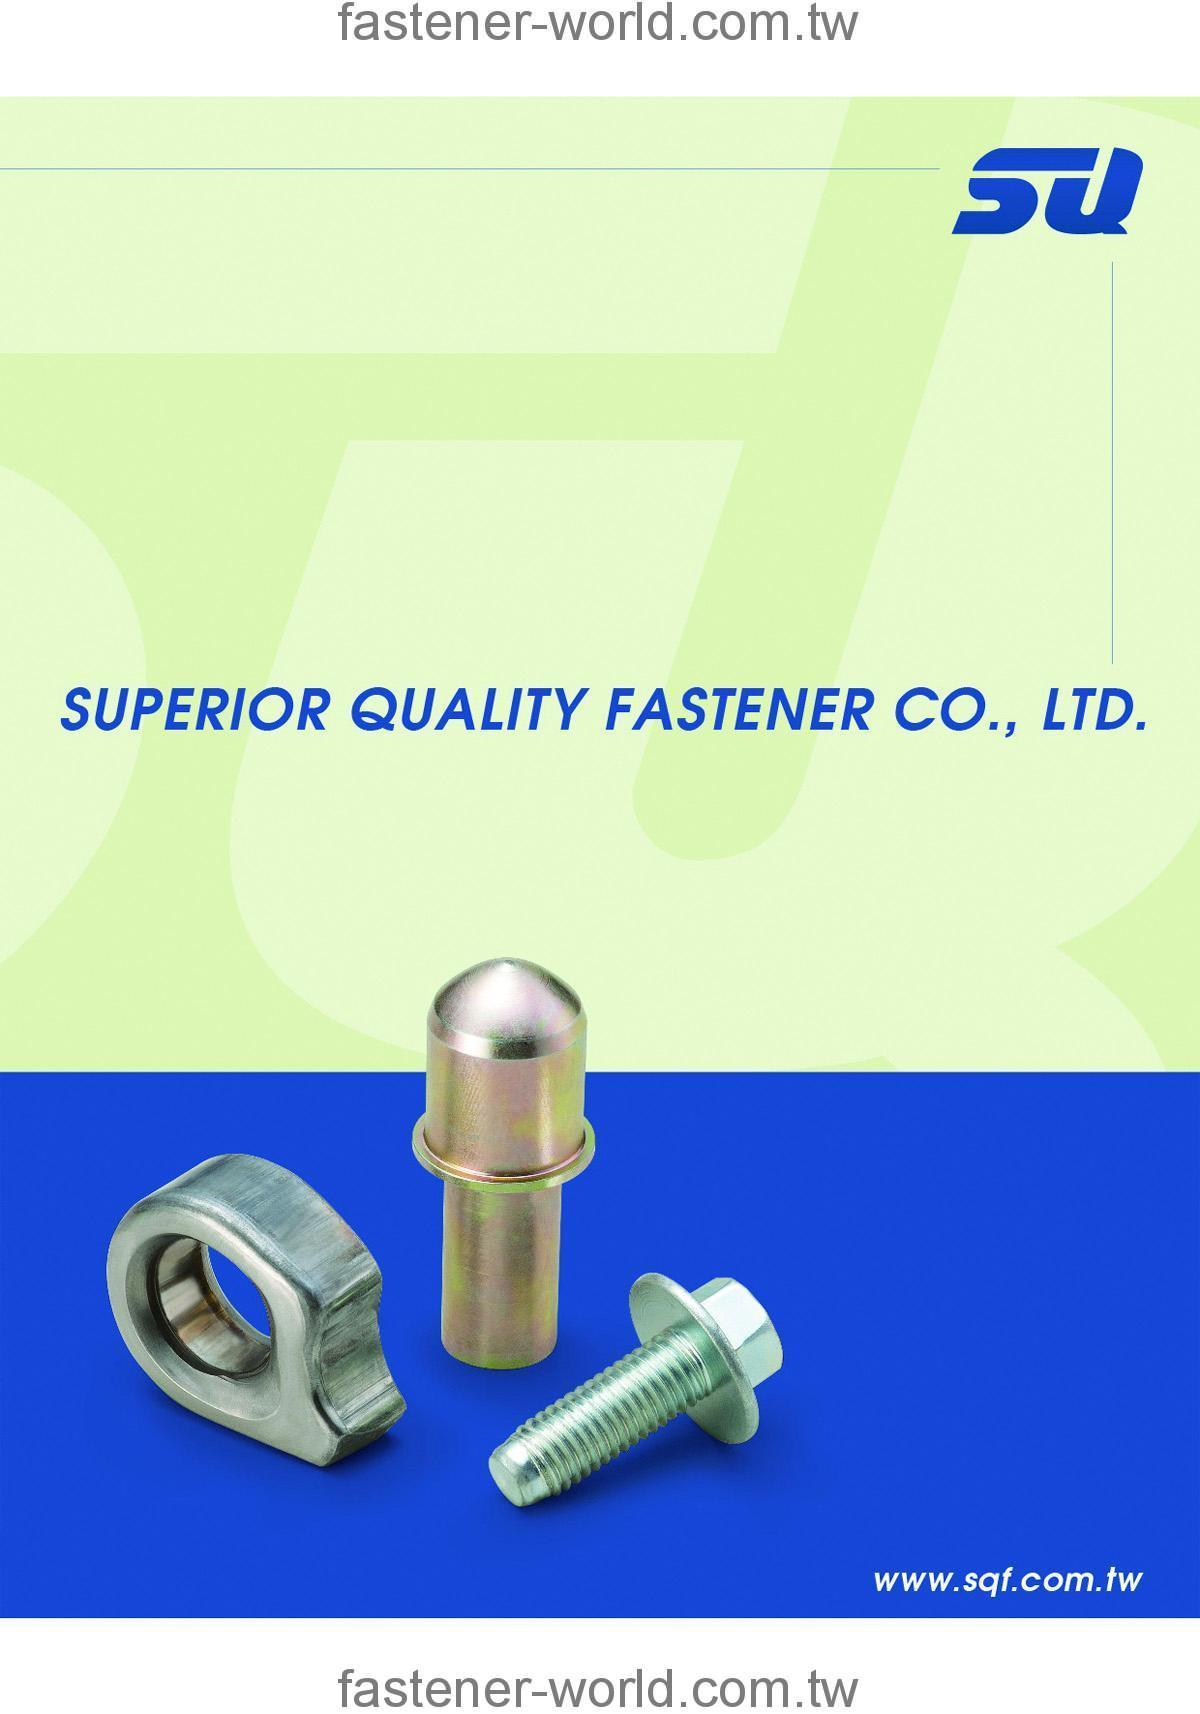 SUPERIOR QUALITY FASTENER CO., LTD. _Online Catalogues